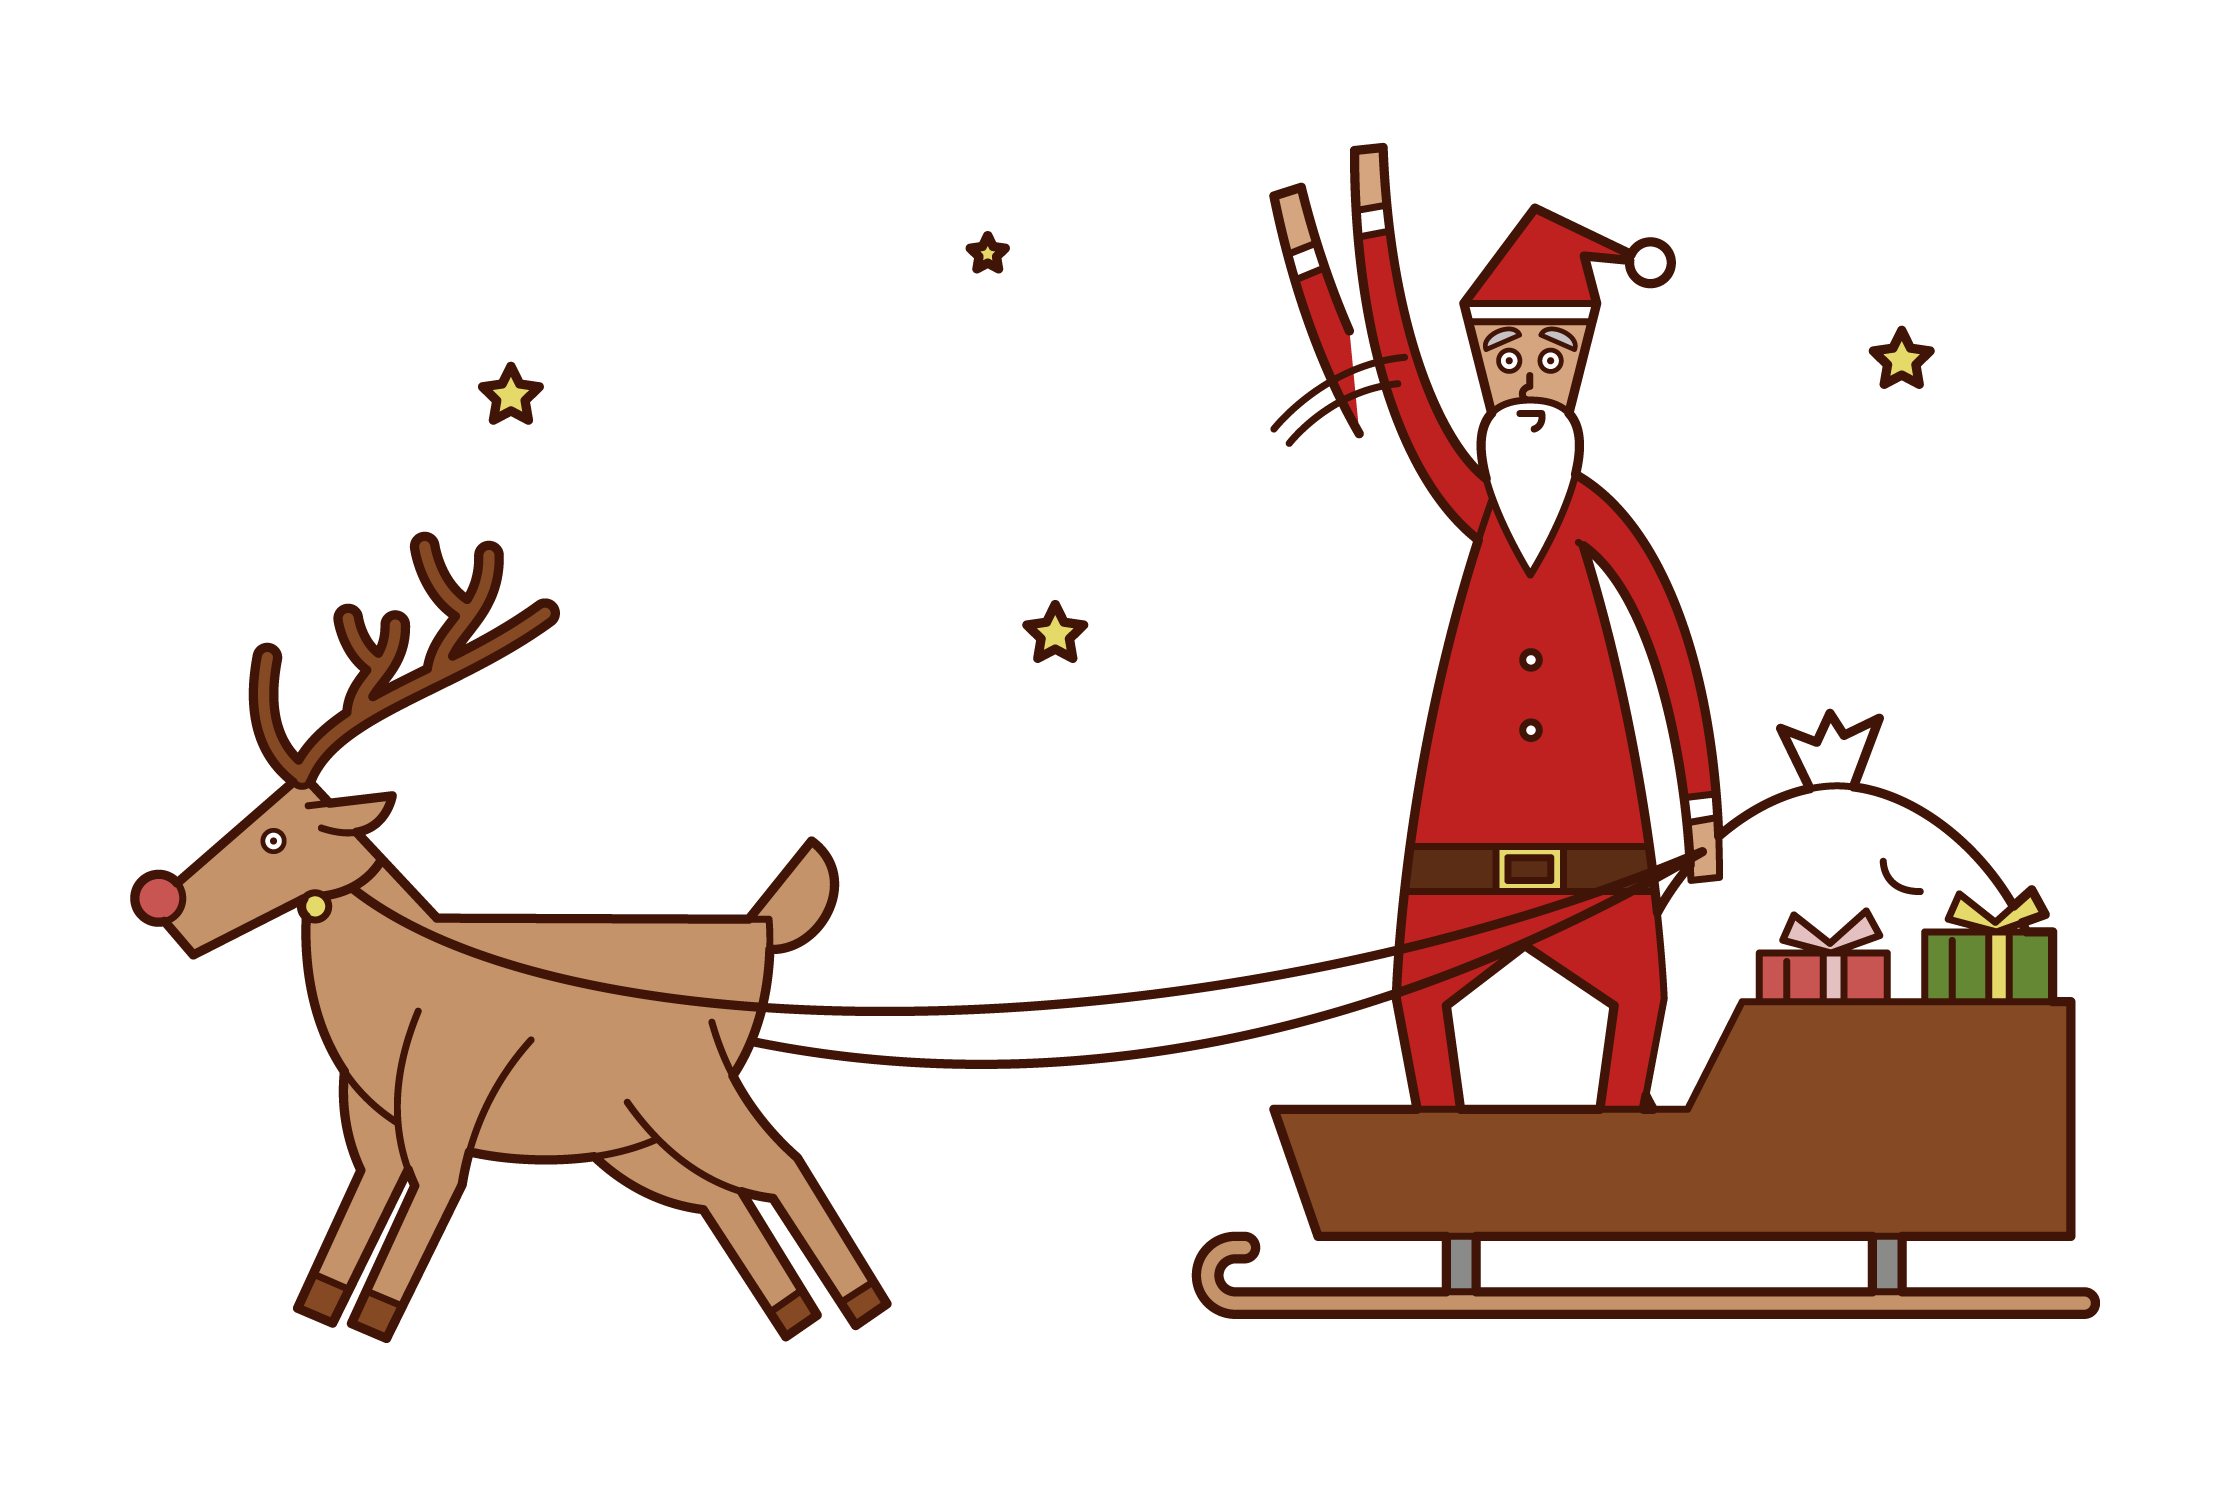 Illustration of Santa Claus waved from the top of a sled